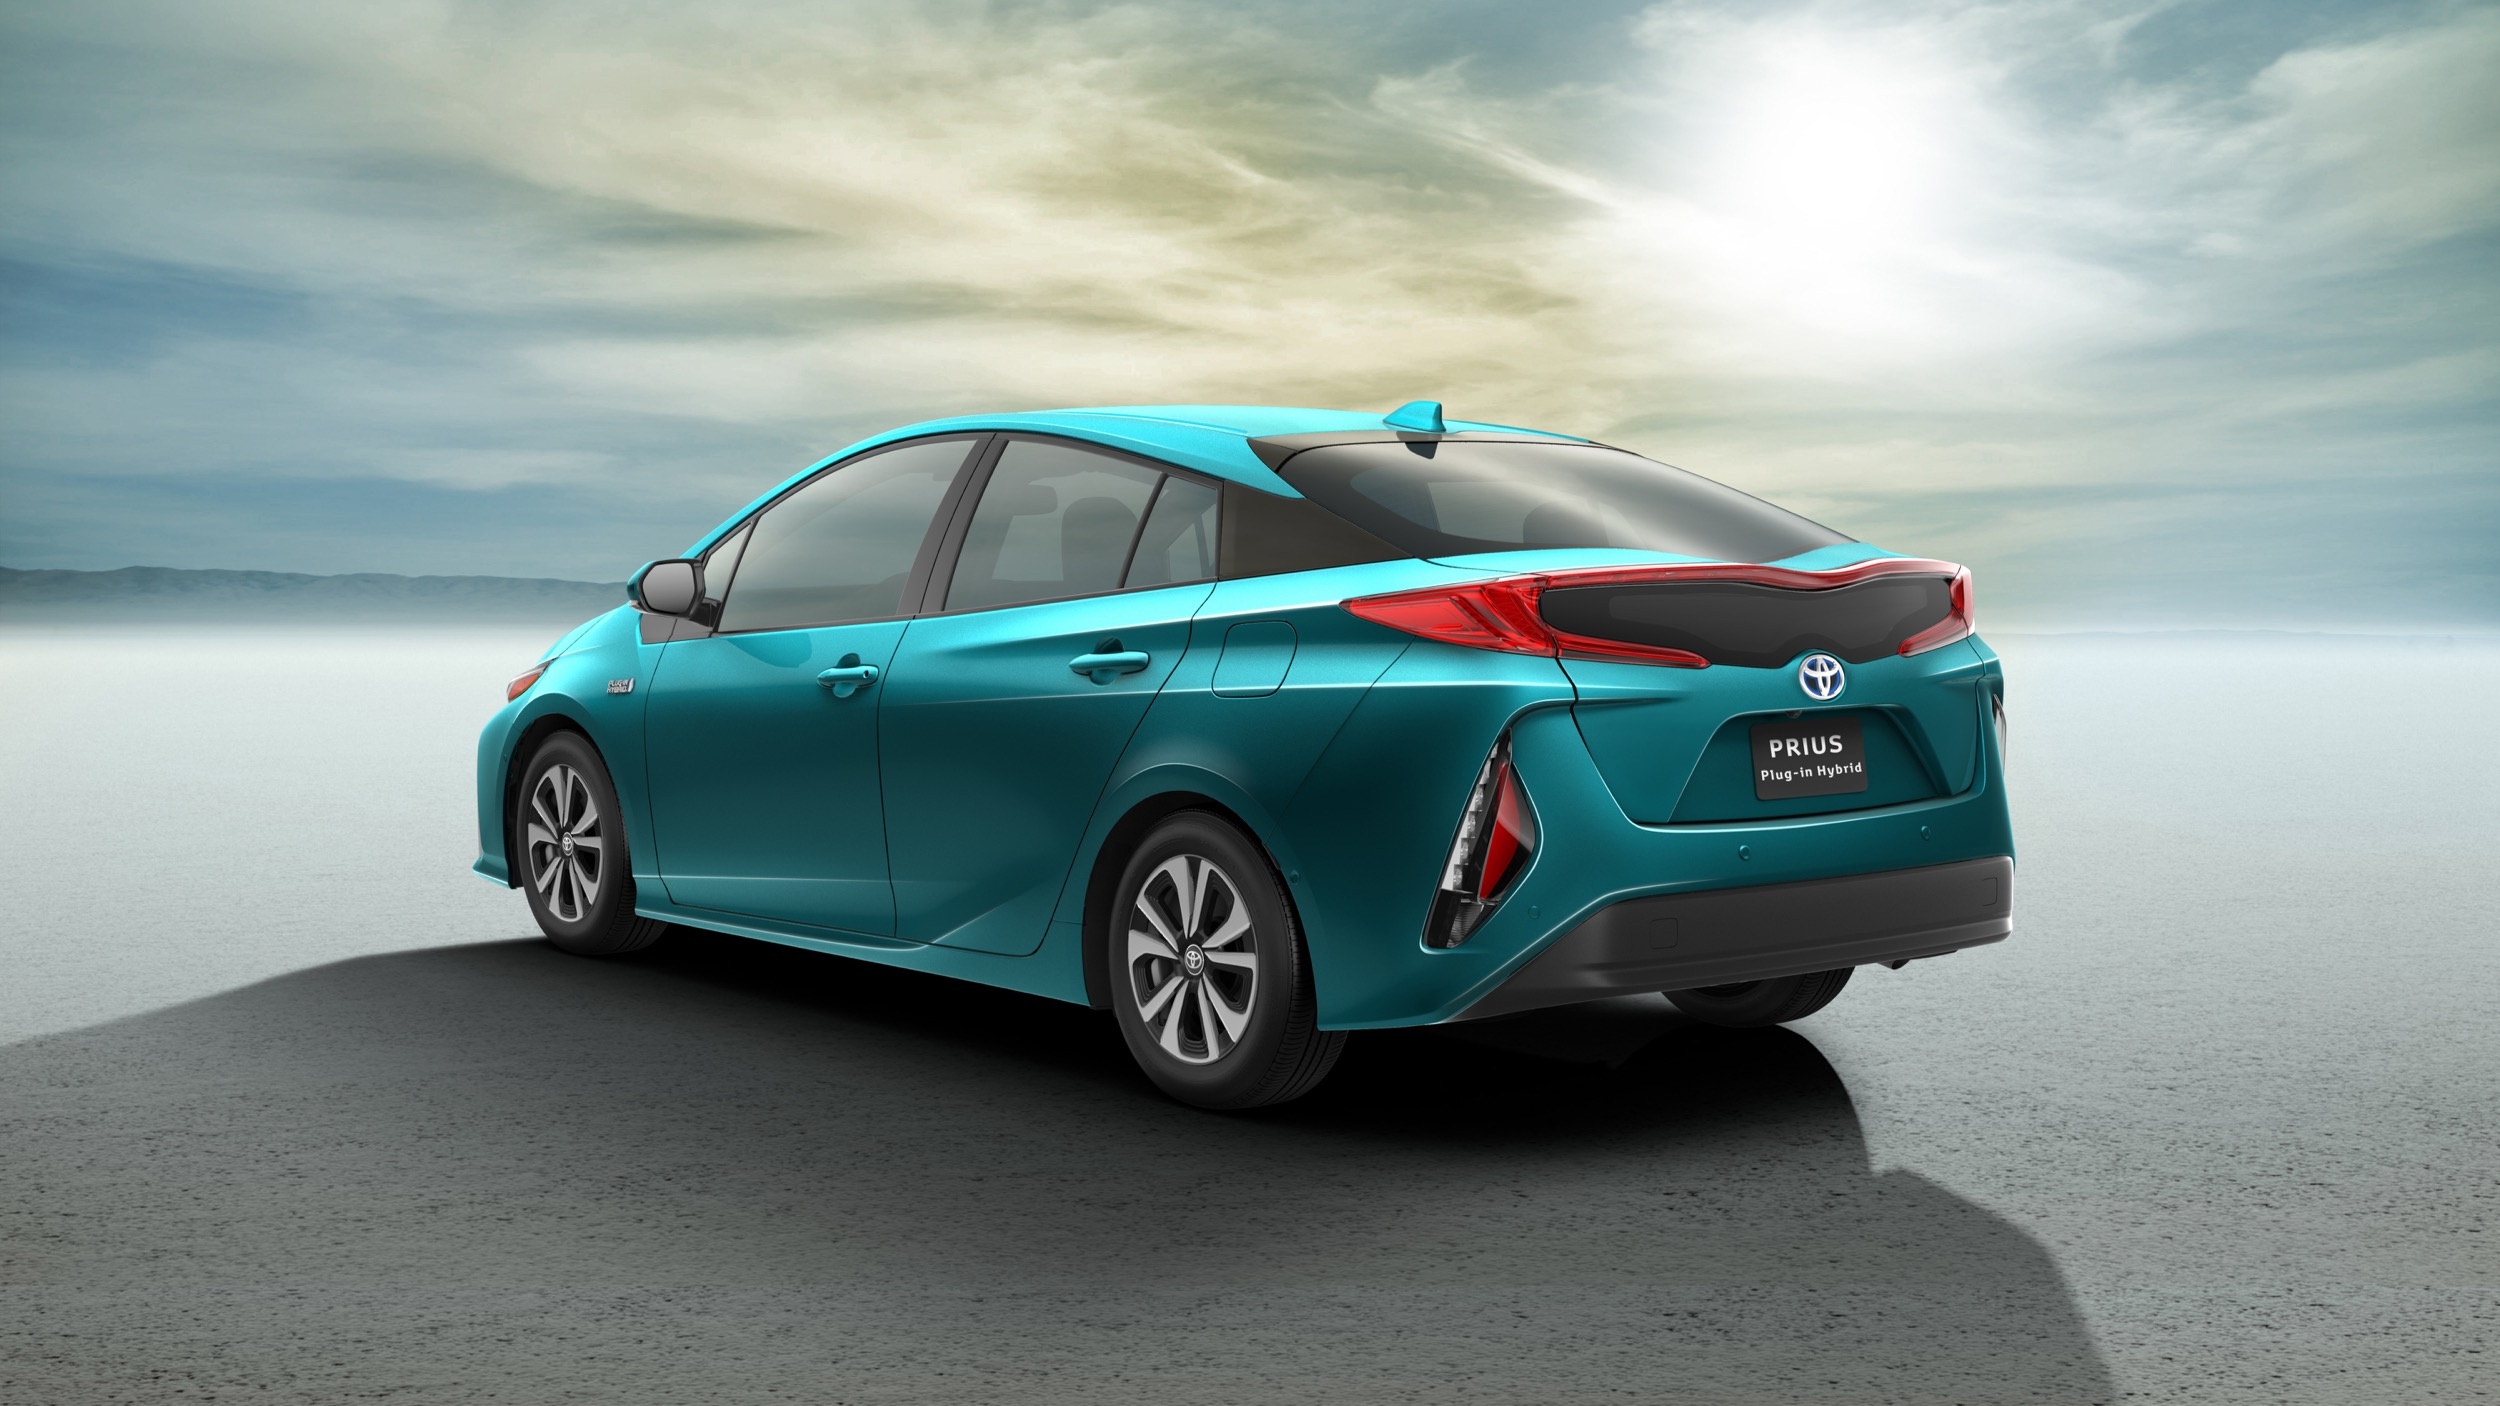 Toyota Prius, Plug-in hybrid, Sustainable mobility, Future-focused technology, 2500x1410 HD Desktop